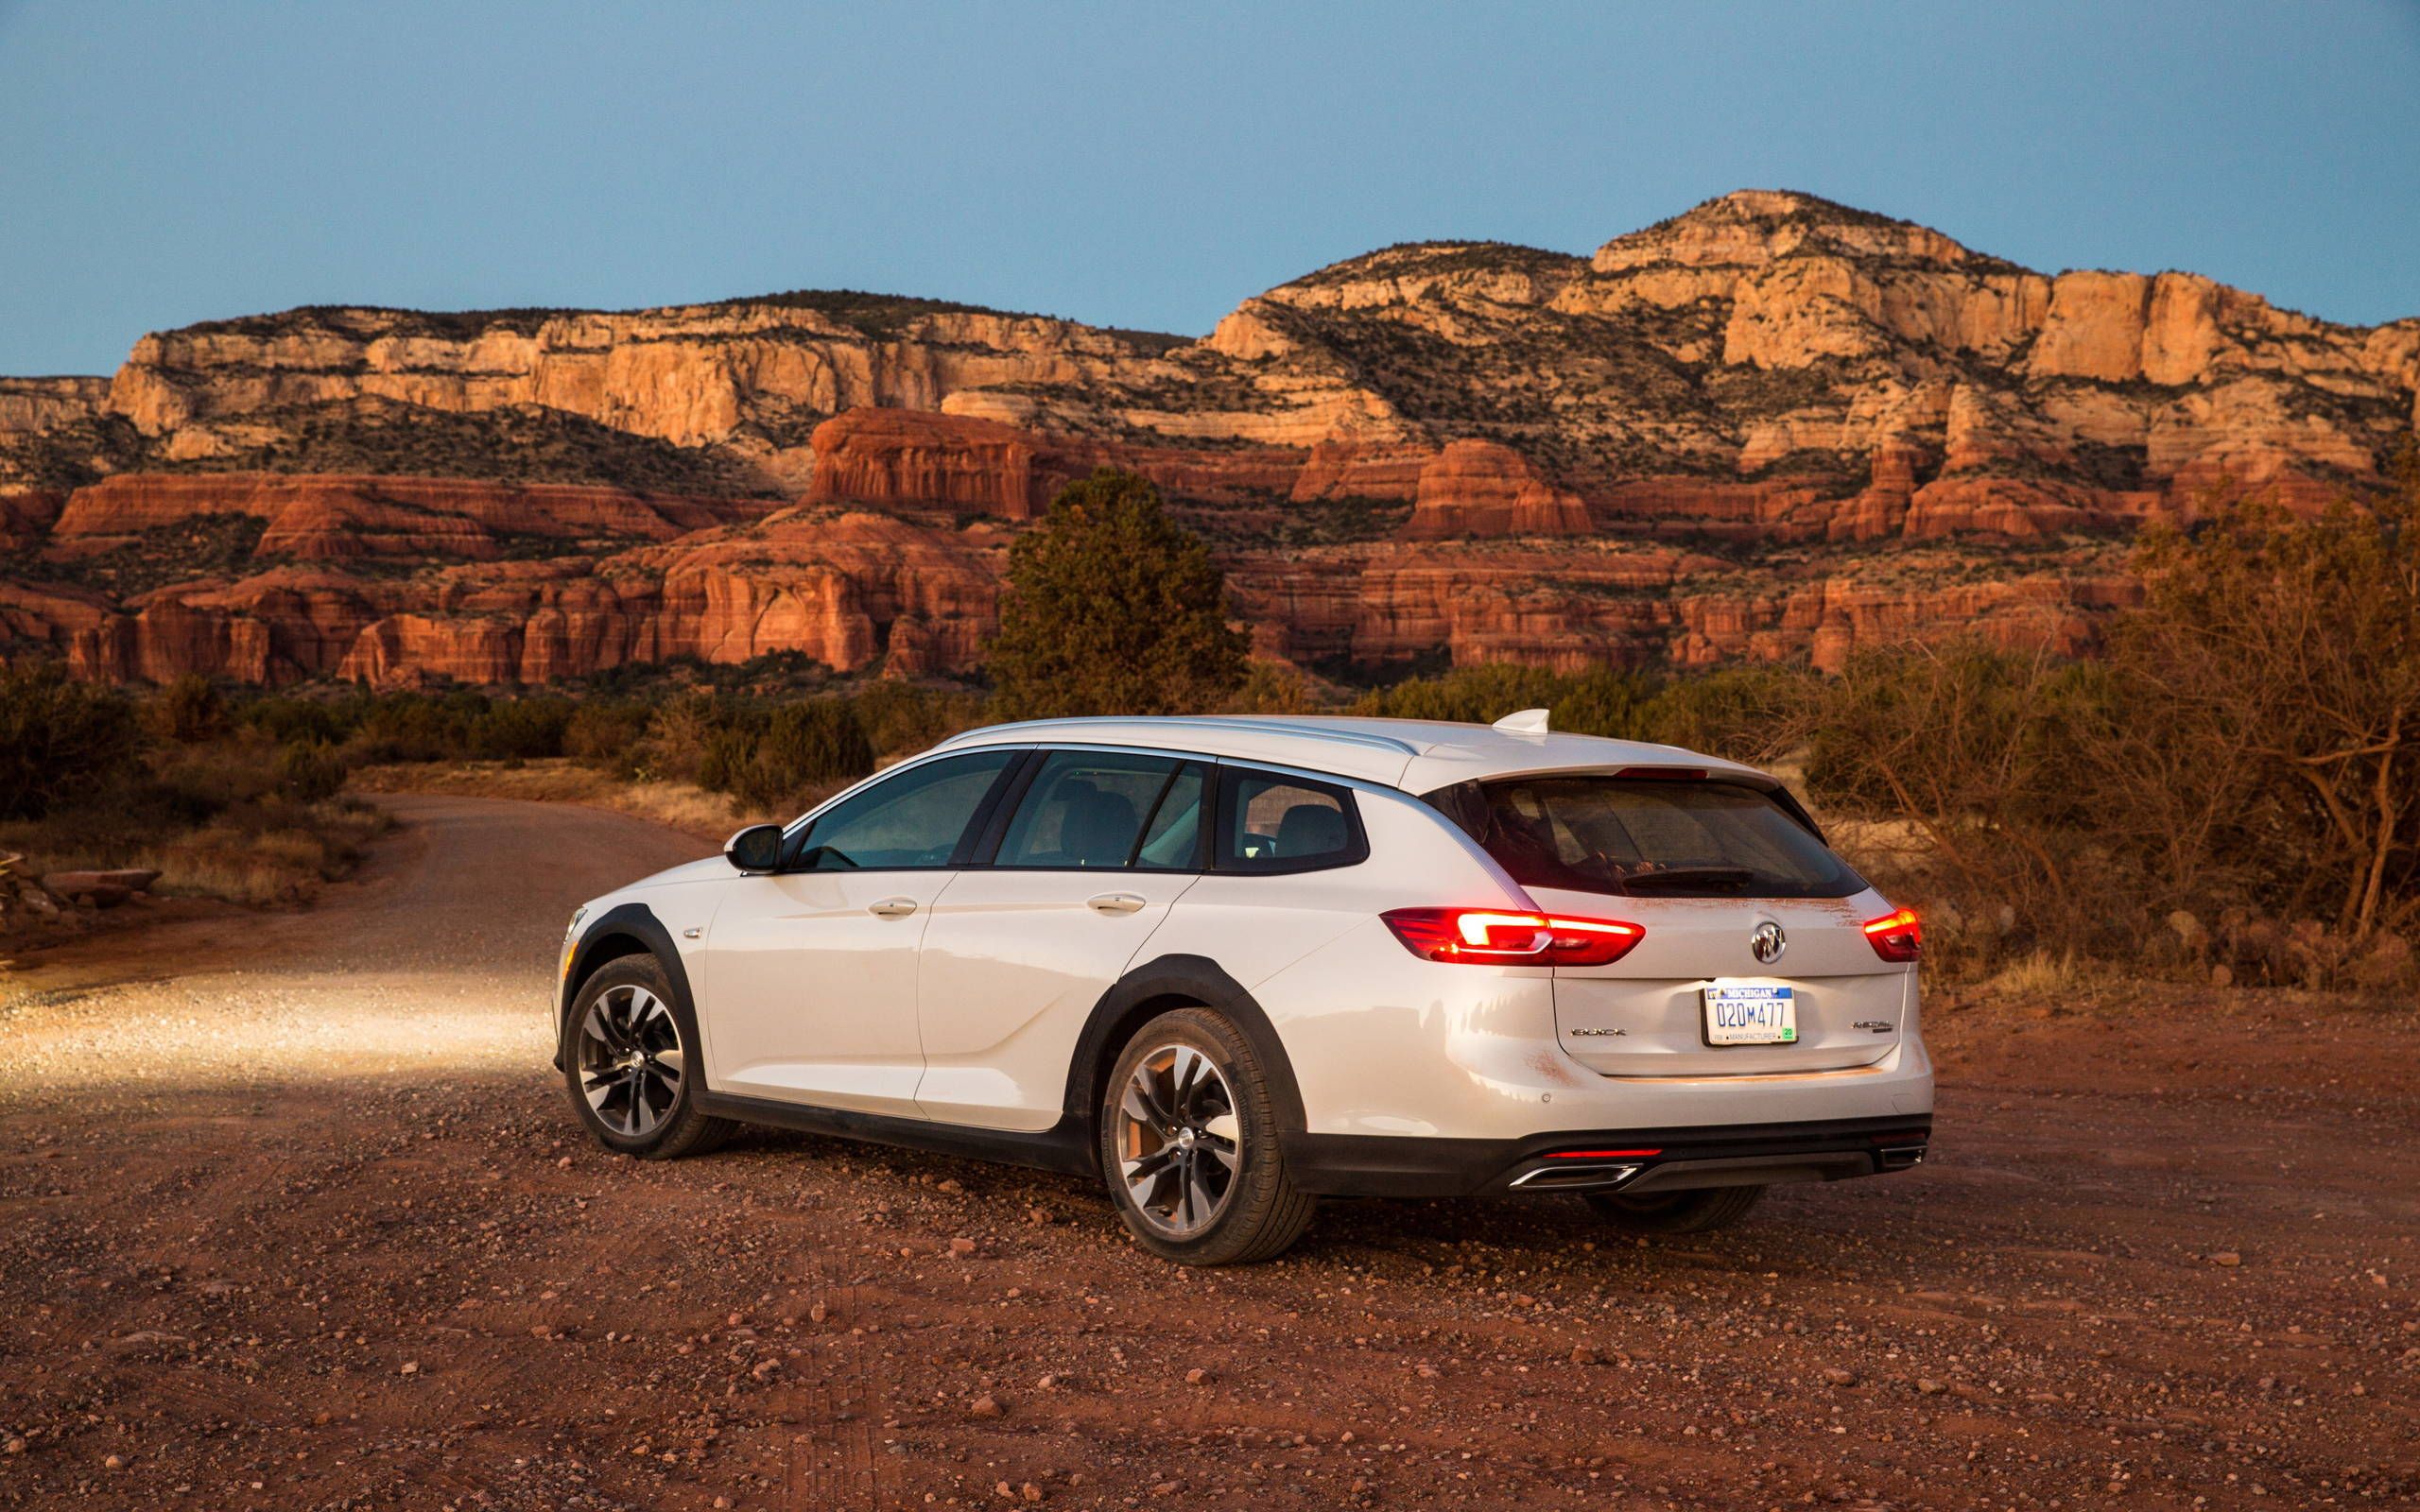 2019 Buick Regal TourX drive review: Everything you need to know